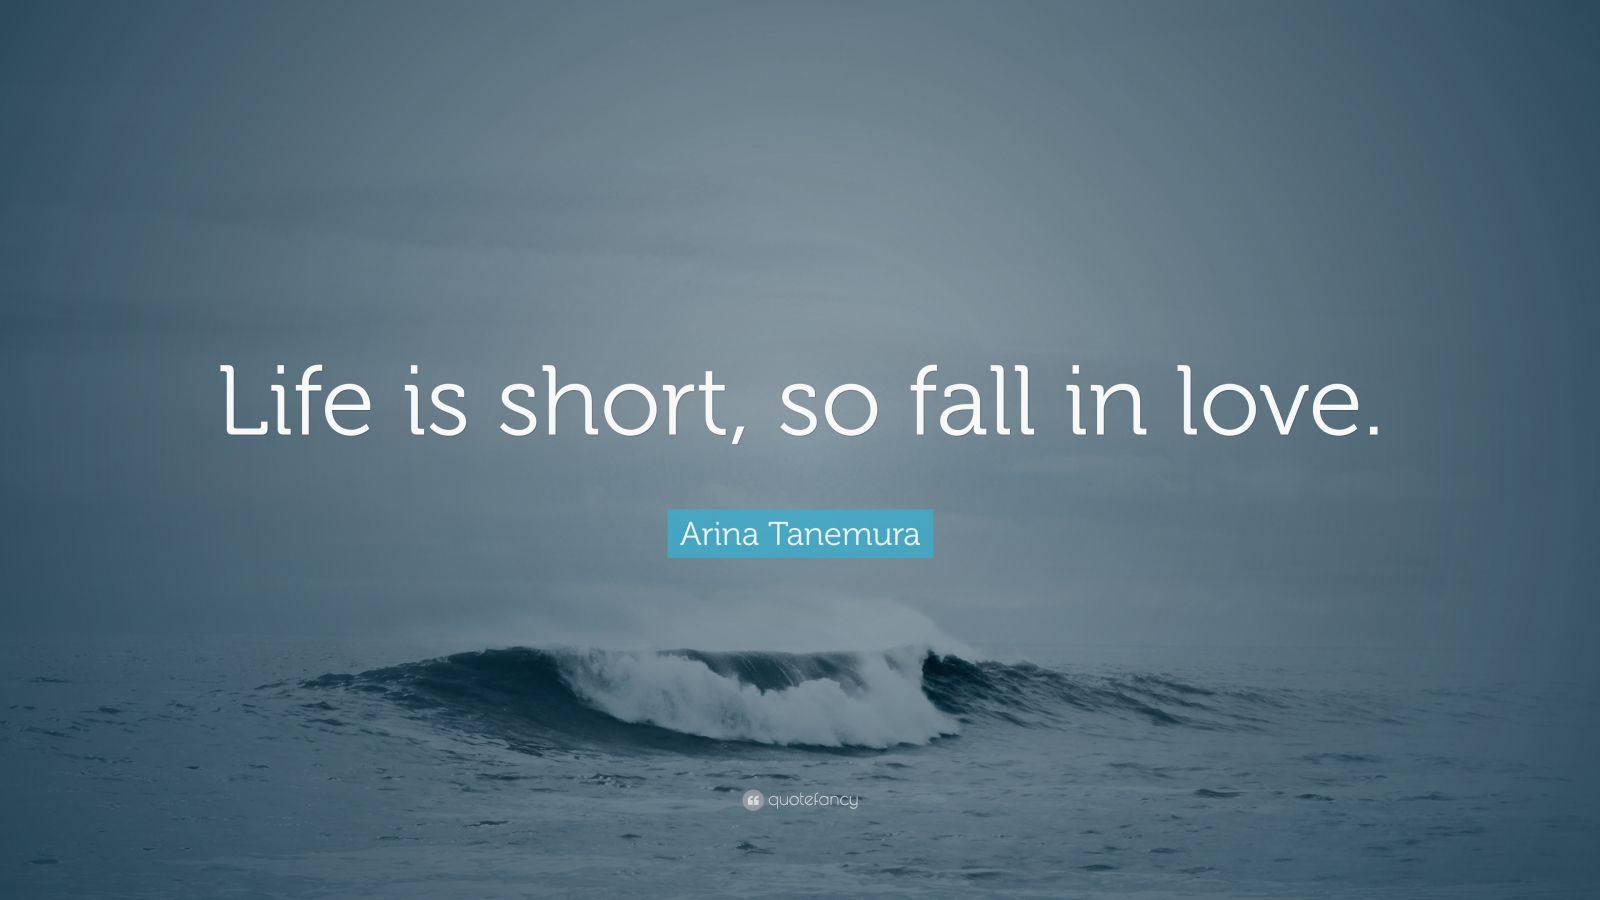 Arina Tanemura Quote: “To each their own. One must live each day